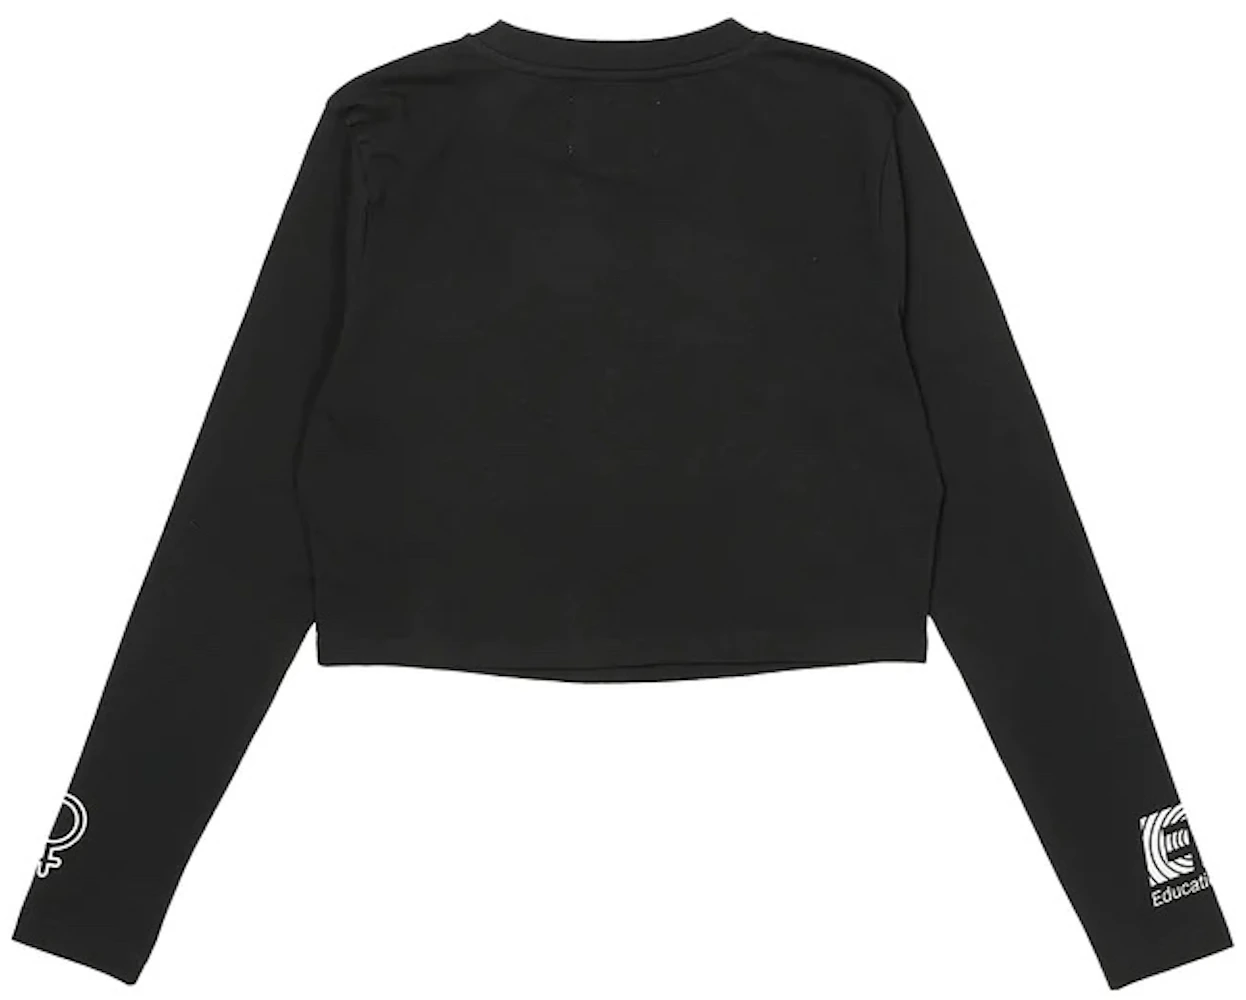 https://images.stockx.com/images/Palace-x-Rapha-EF-Education-First-Womens-Cropped-T-shirt-Black-2.jpg?fit=fill&bg=FFFFFF&w=700&h=500&fm=webp&auto=compress&q=90&dpr=2&trim=color&updated_at=1657897678?height=78&width=78